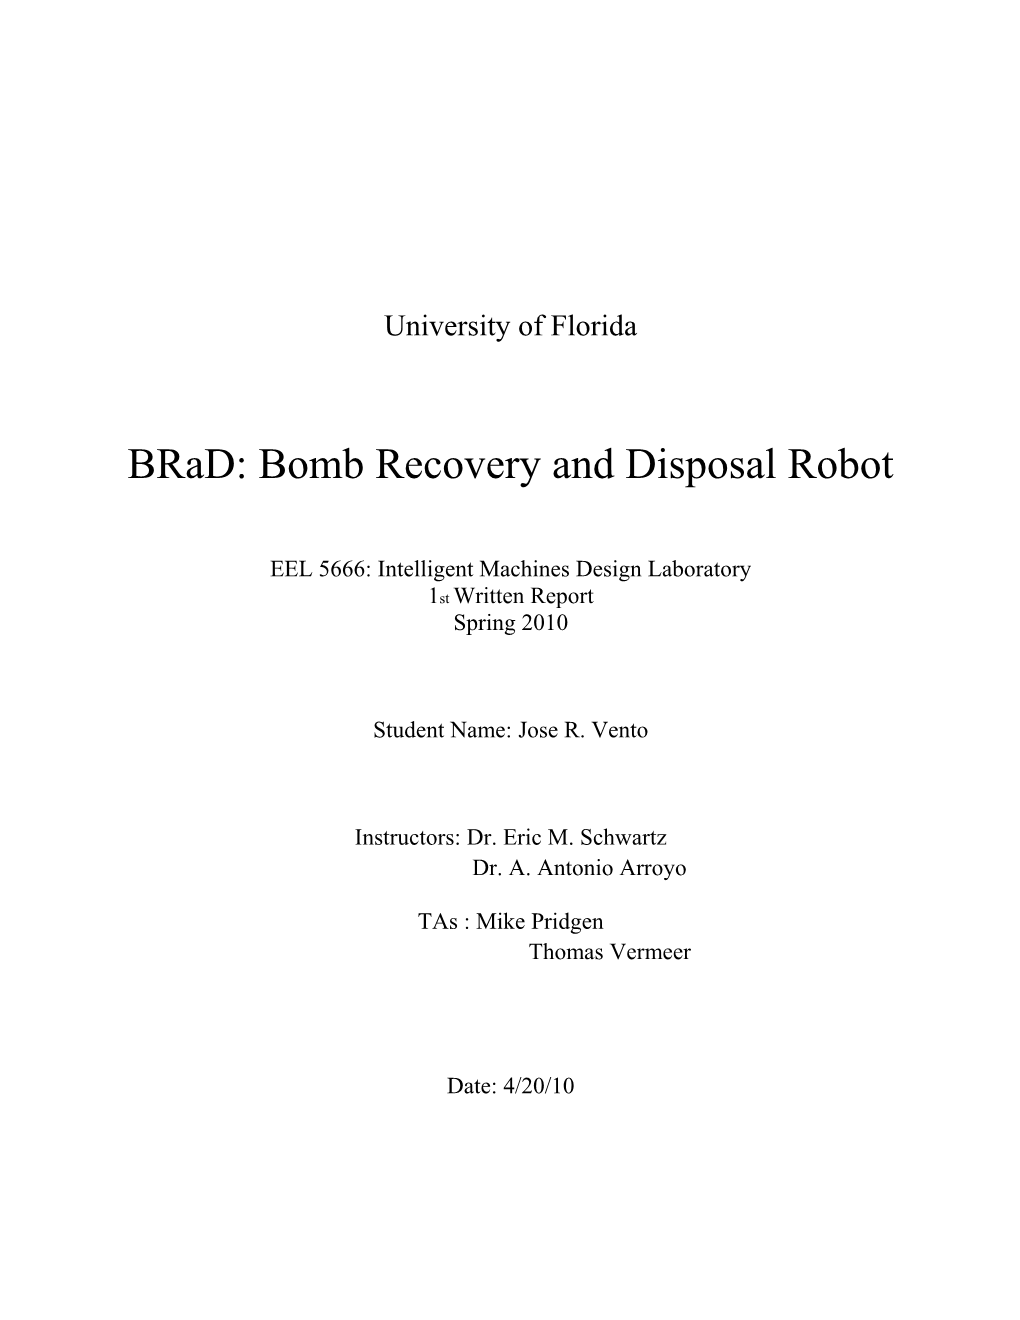 Brad: Bomb Recovery and Disposal Robot